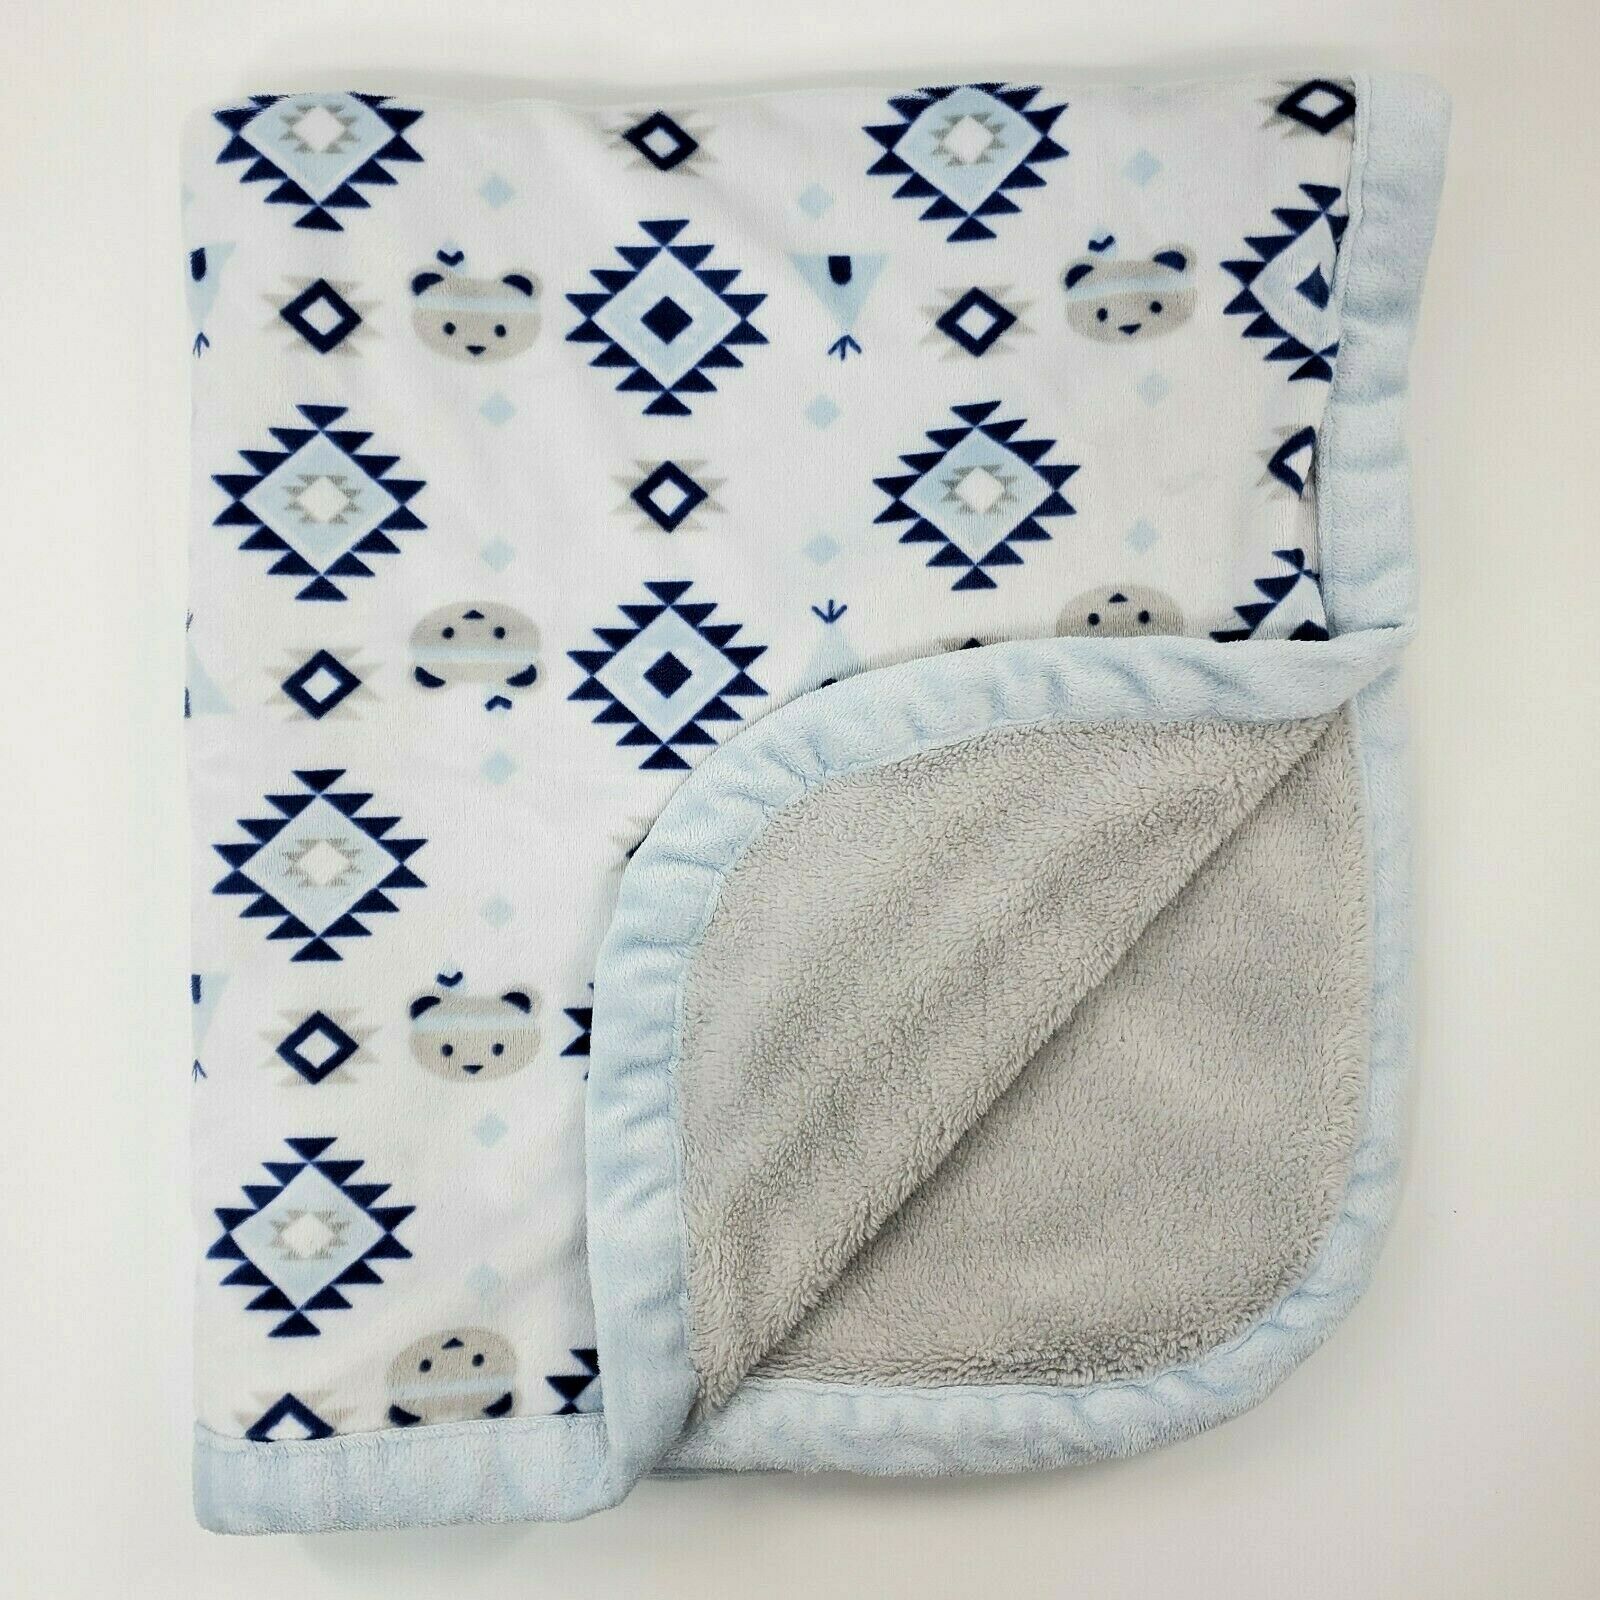 Primary image for Blankets & Beyond Baby Blanket Indian Bears Aztec Tribal Plush Blue Boy B26